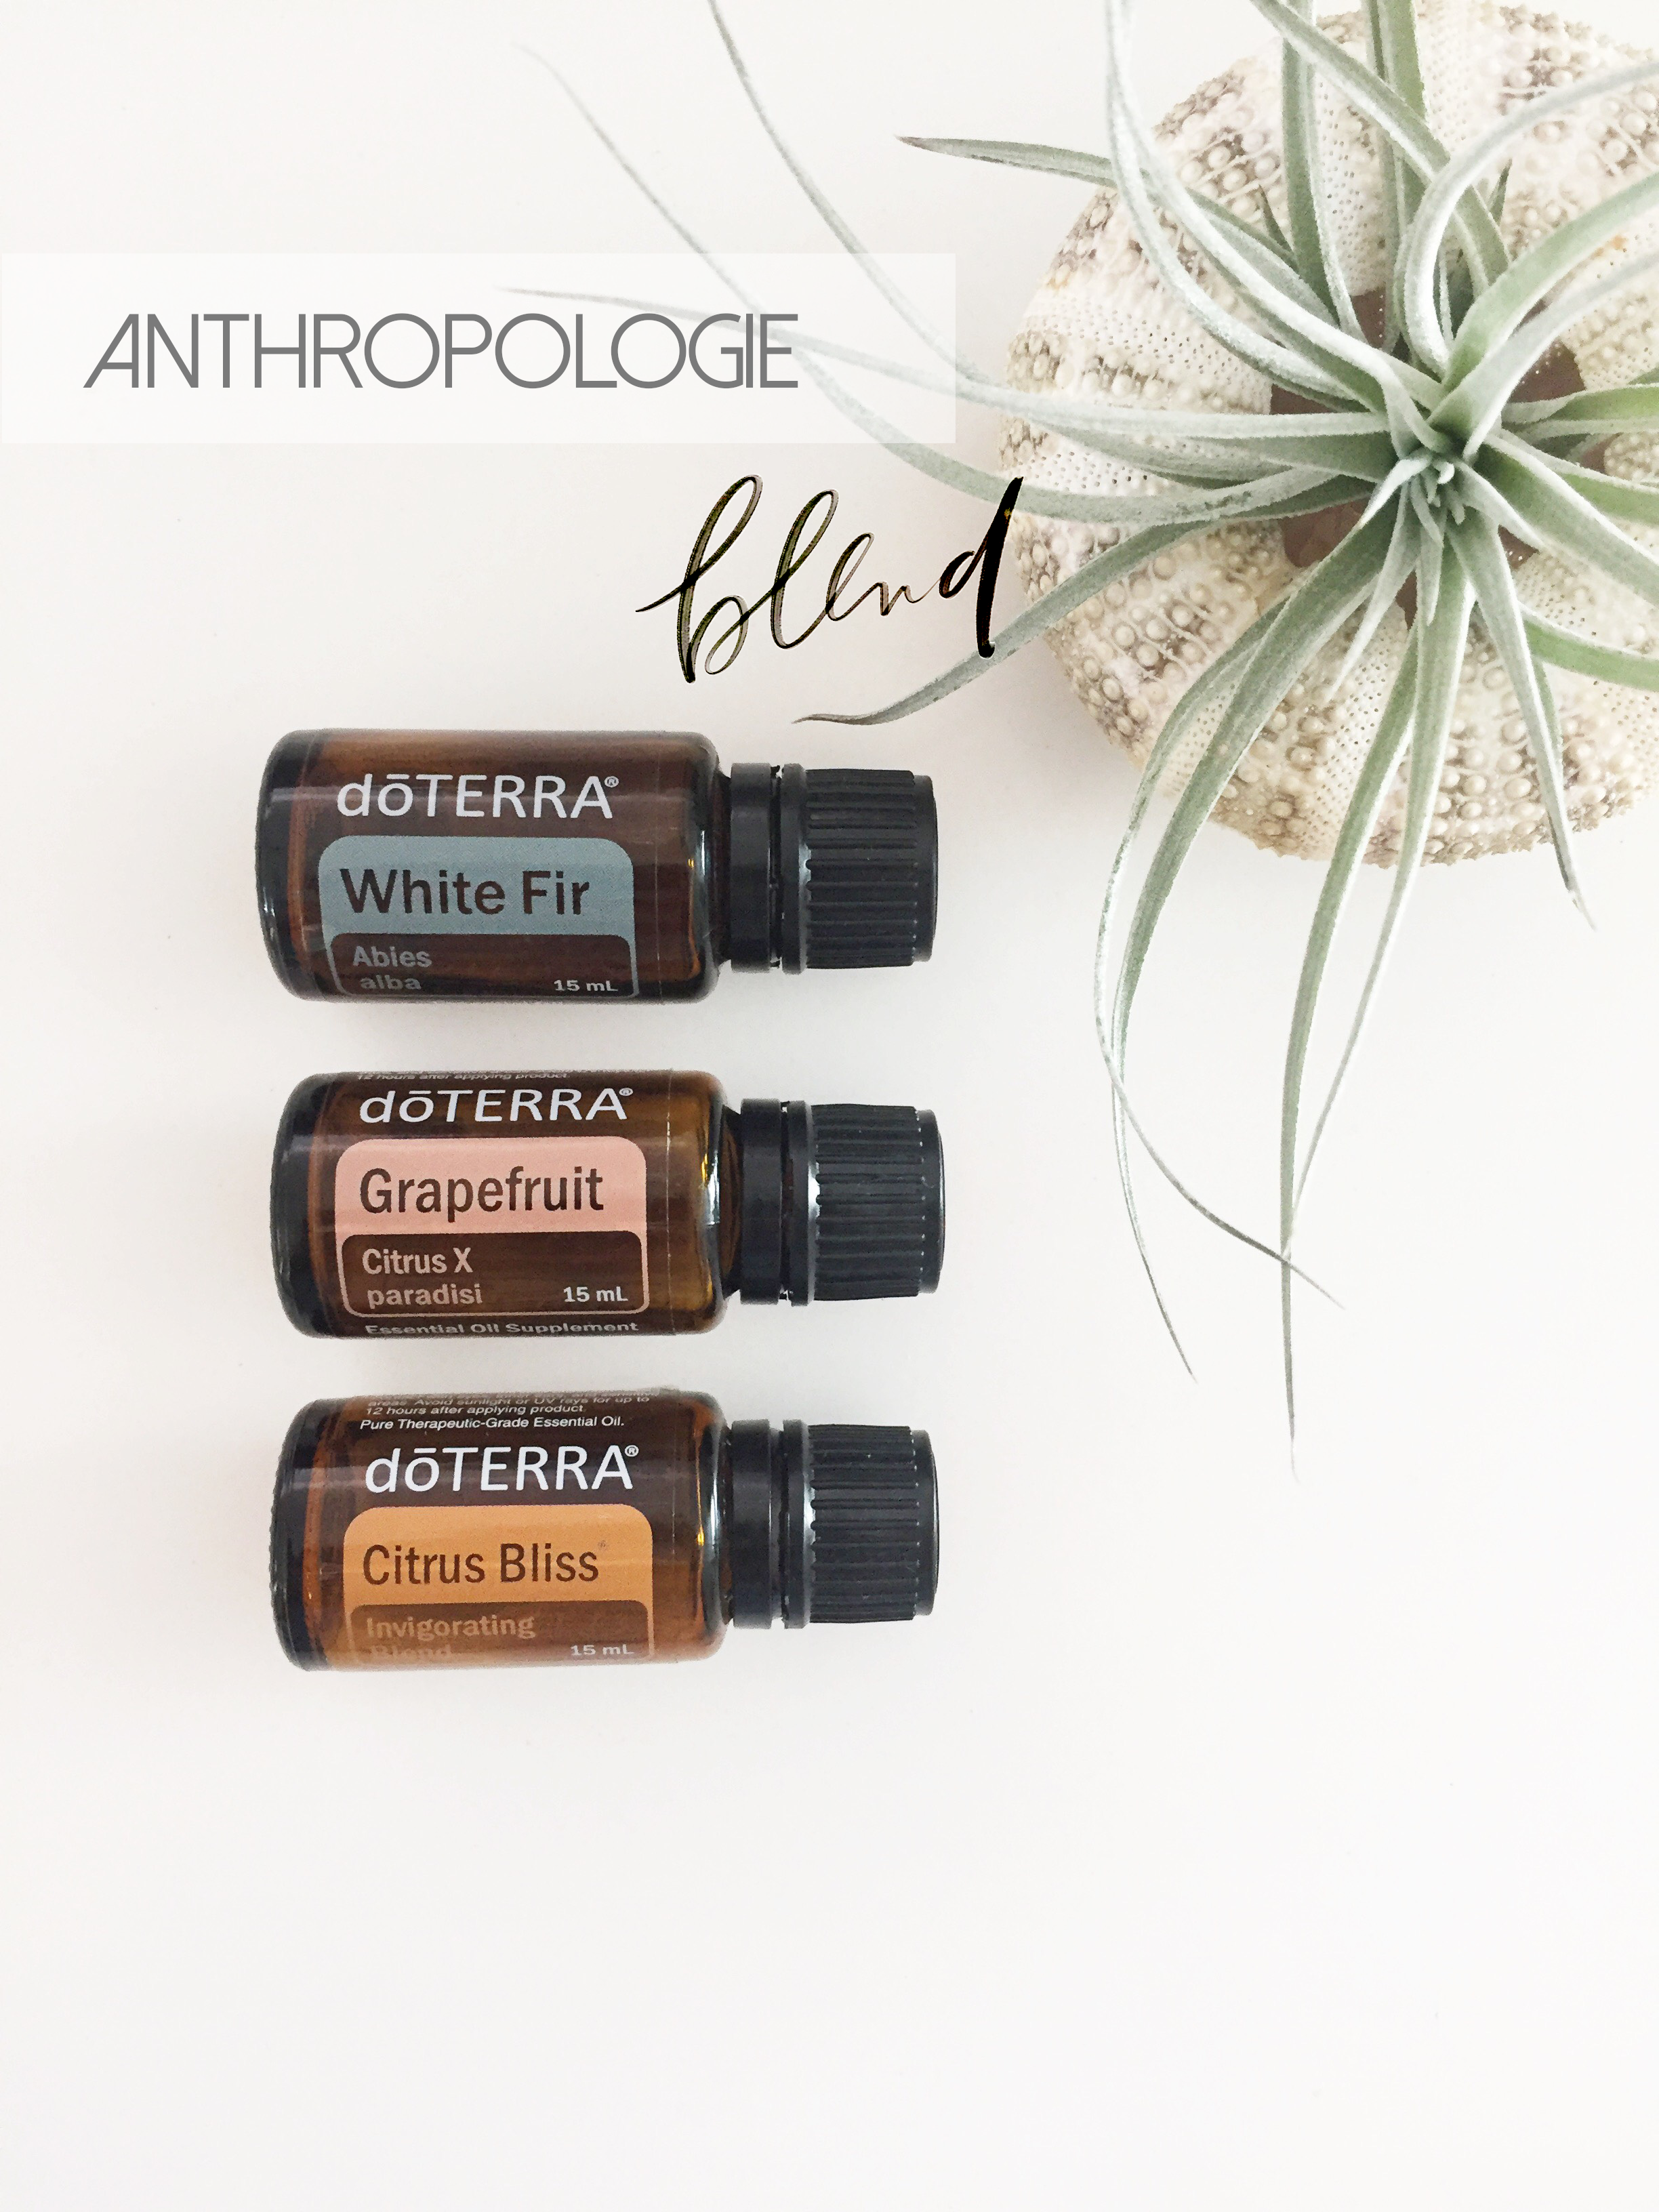 Let’s Diffuse! – Daily Essential Oil Blends